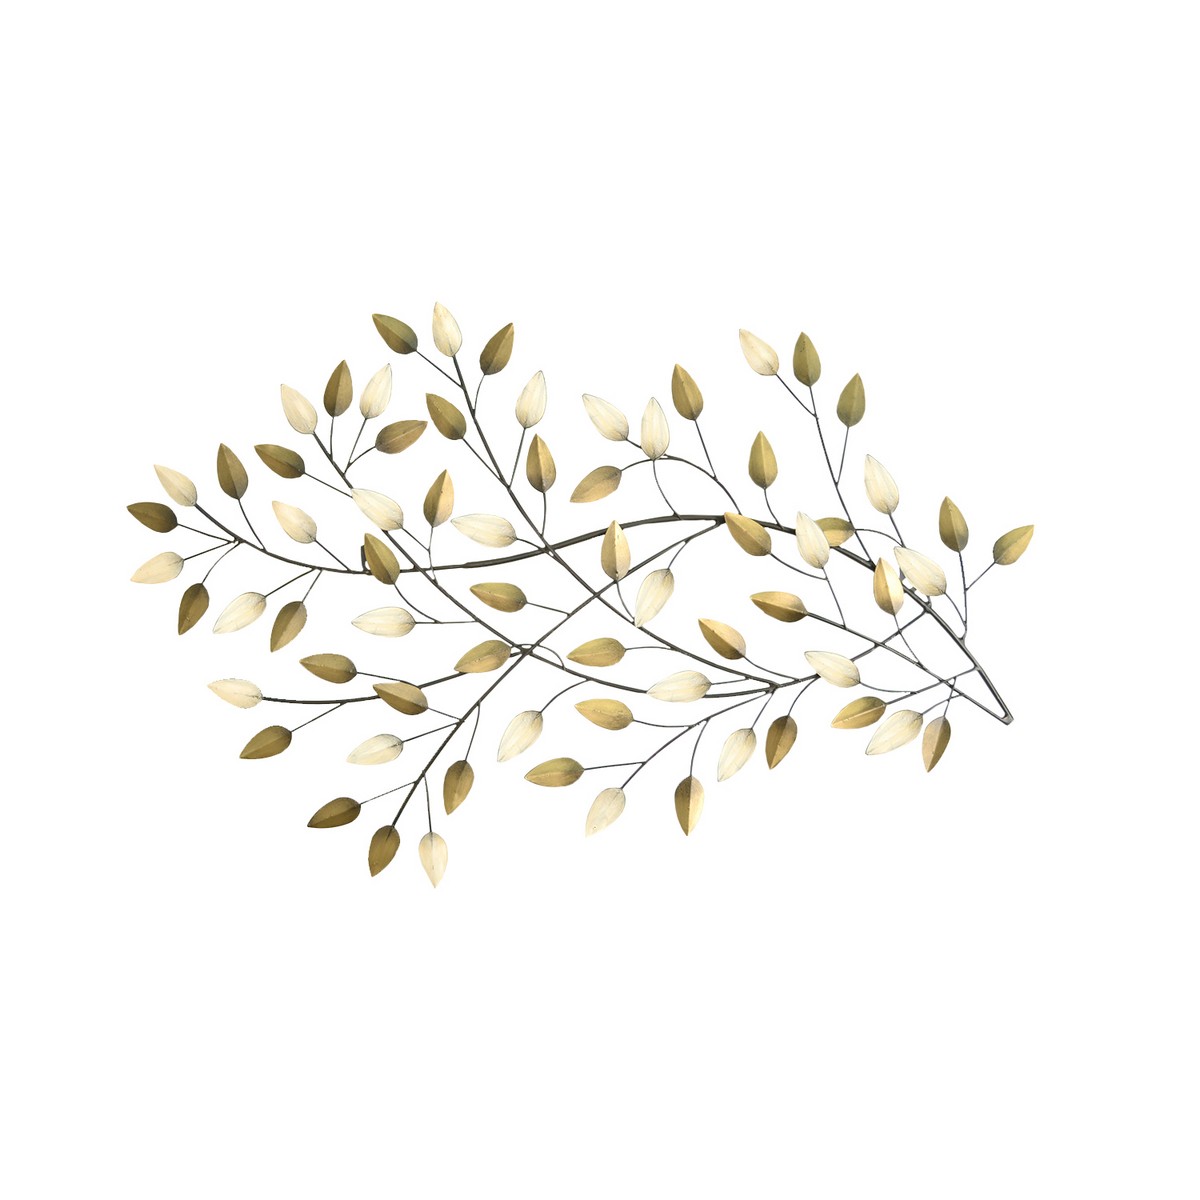 Stratton Home Decor Blowing Leaves - Gold/Beige